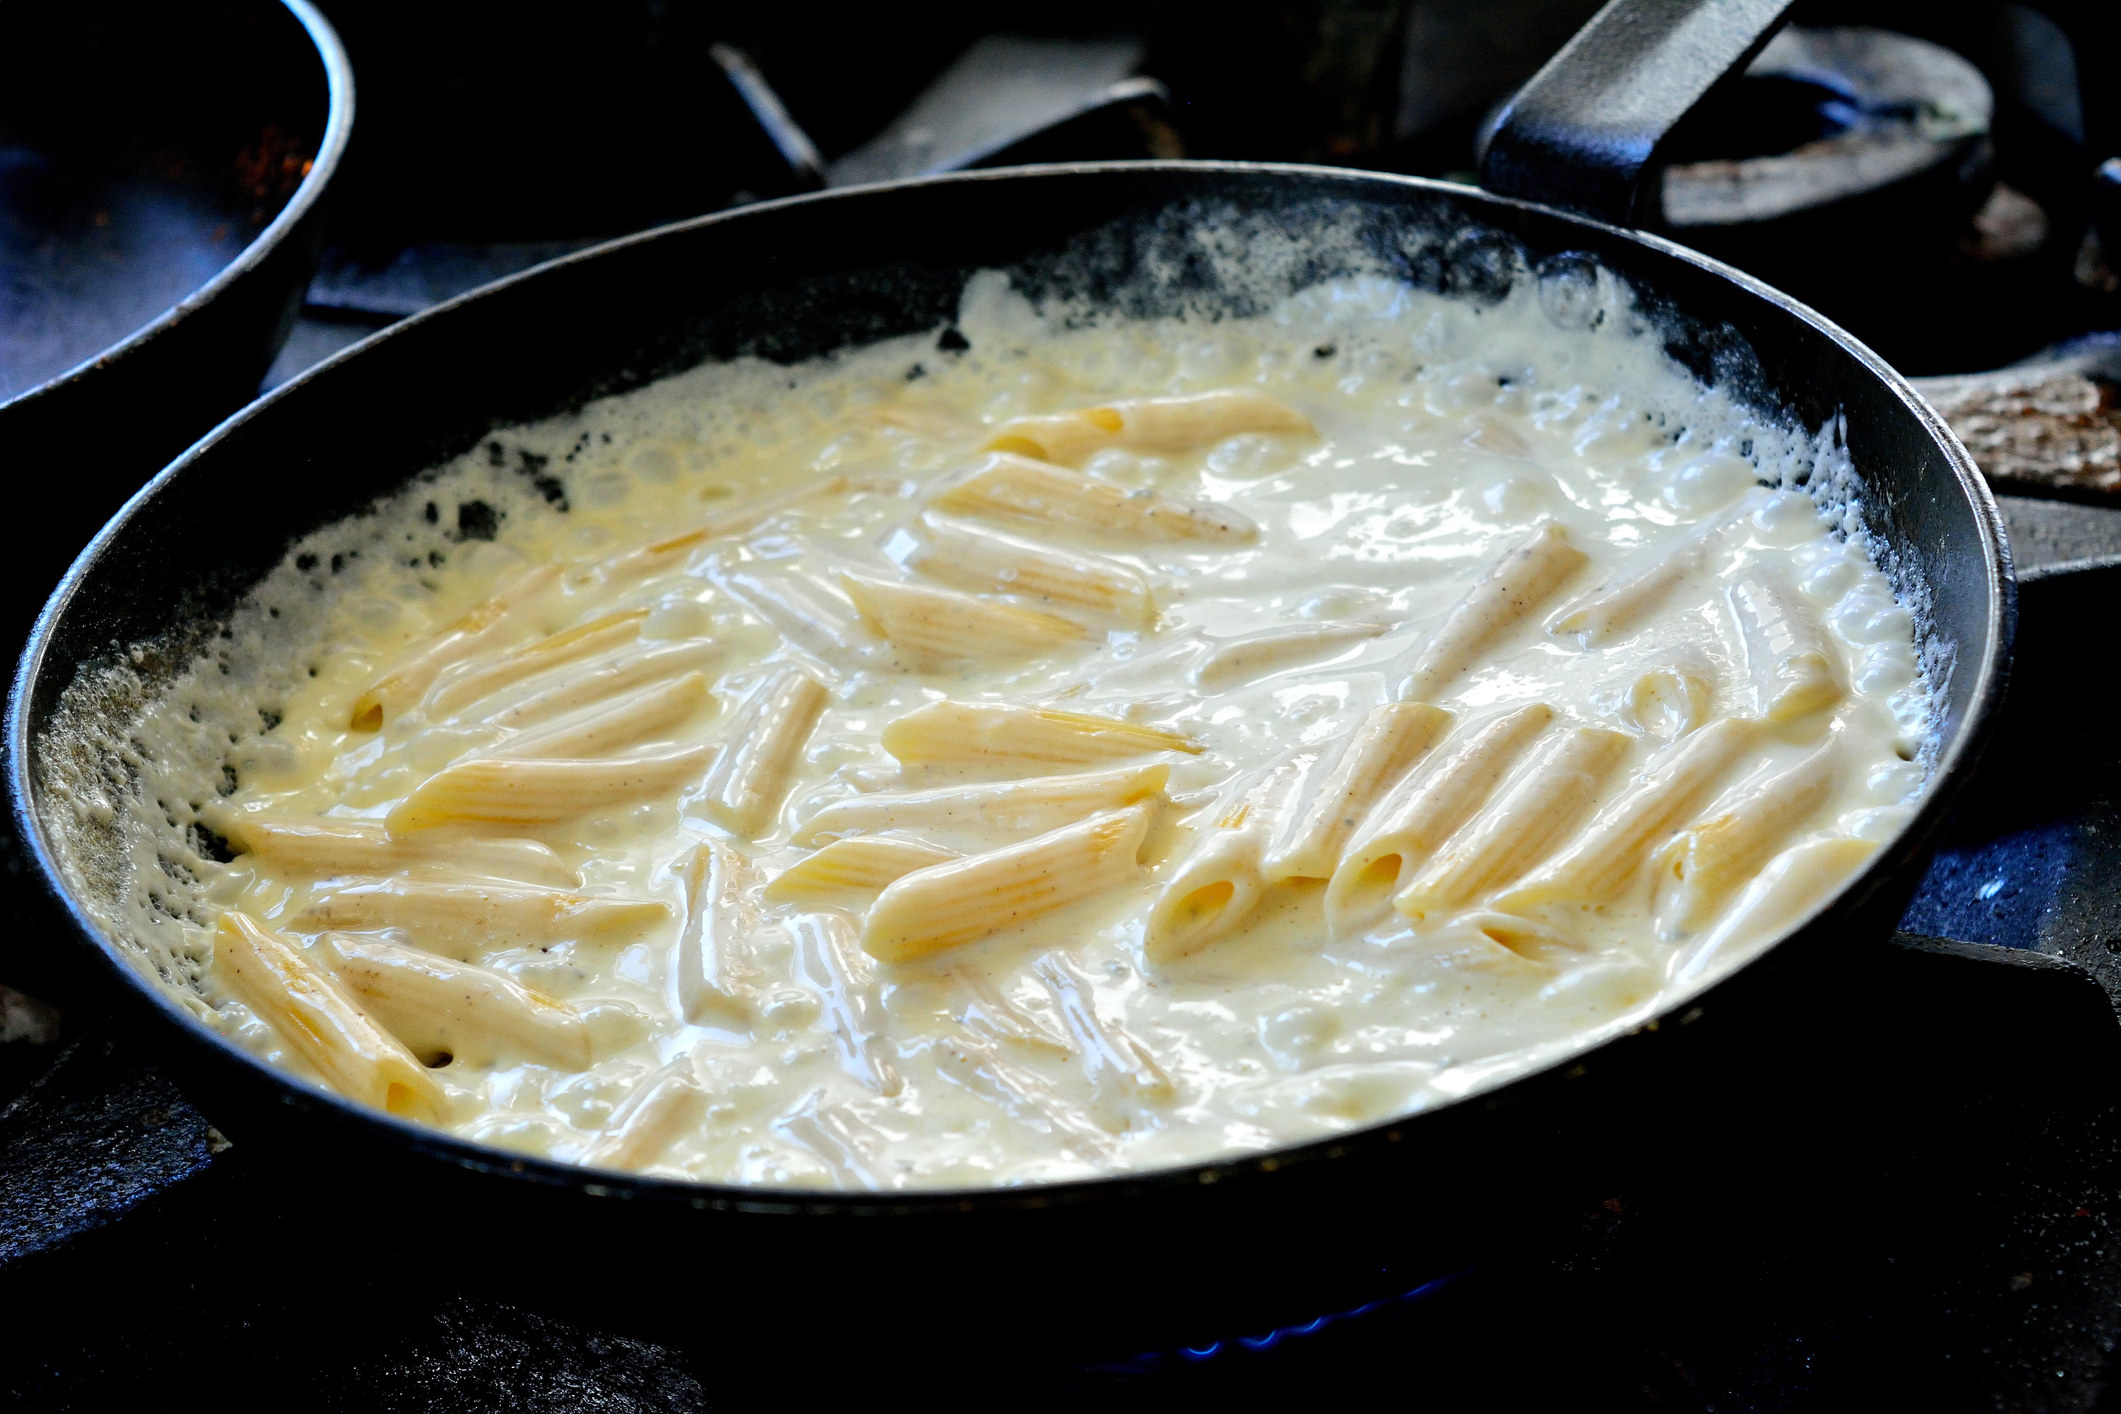 Penne in cheese sauce.